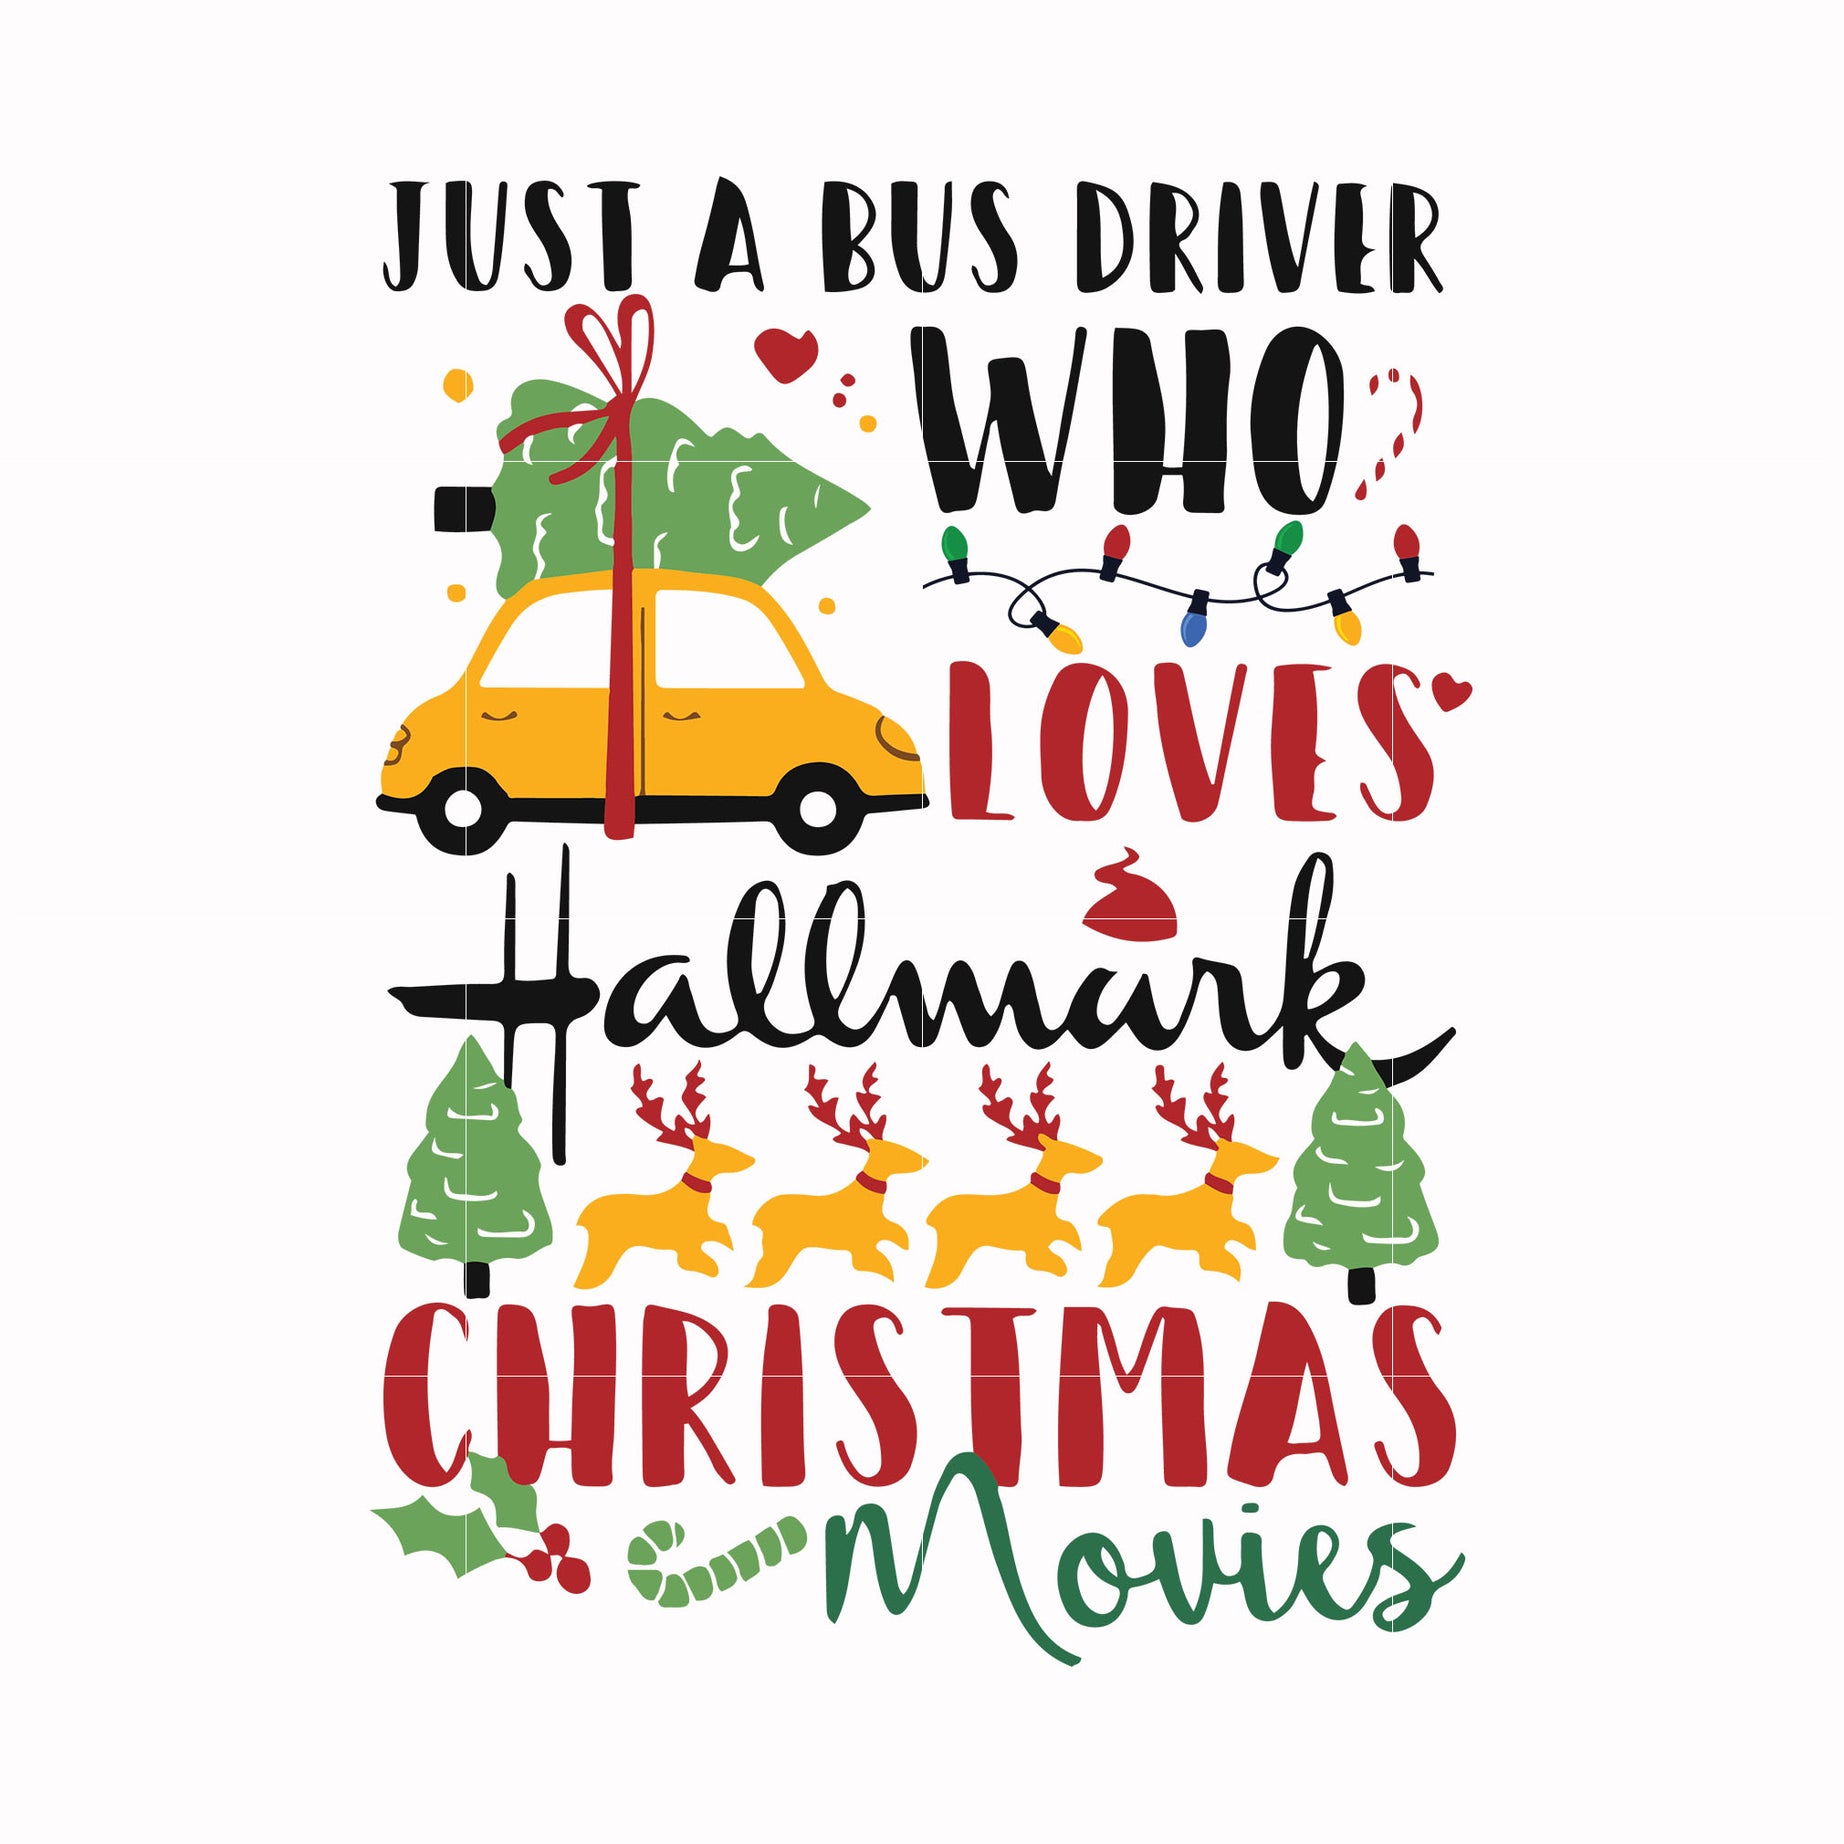 Just a bus driver who loves hallmark christmas movies svg, png, dxf, eps digital file NCRM1507206